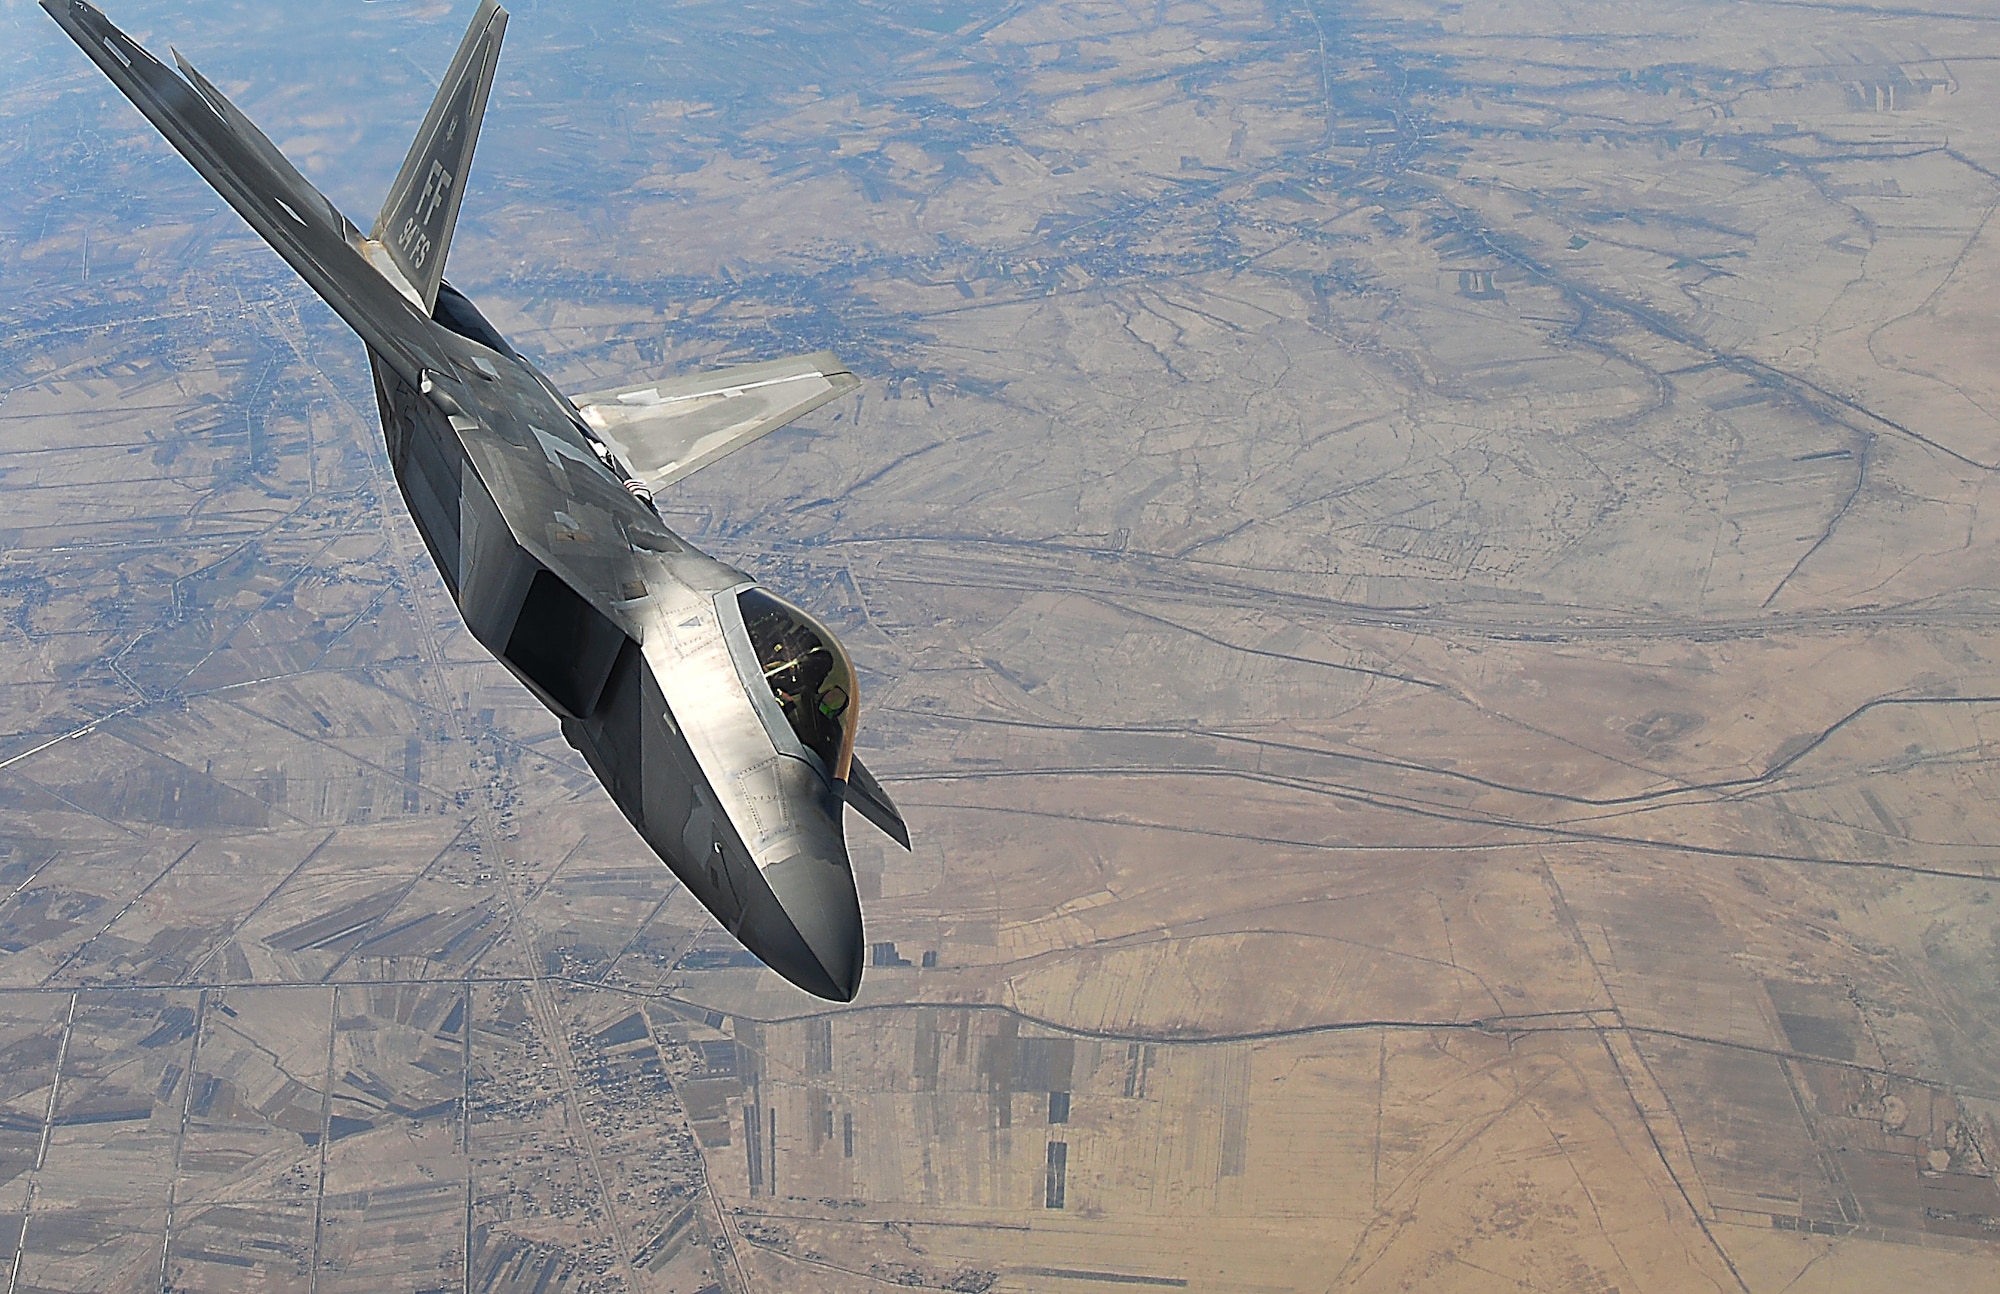 A F-22 Raptor assigned to the 94th Fighter Squadron at the 380th Air Expeditionary Wing, Al Dhafra Air Base, supports Operation Inherent Resolve over the skies of Southwest Asia.